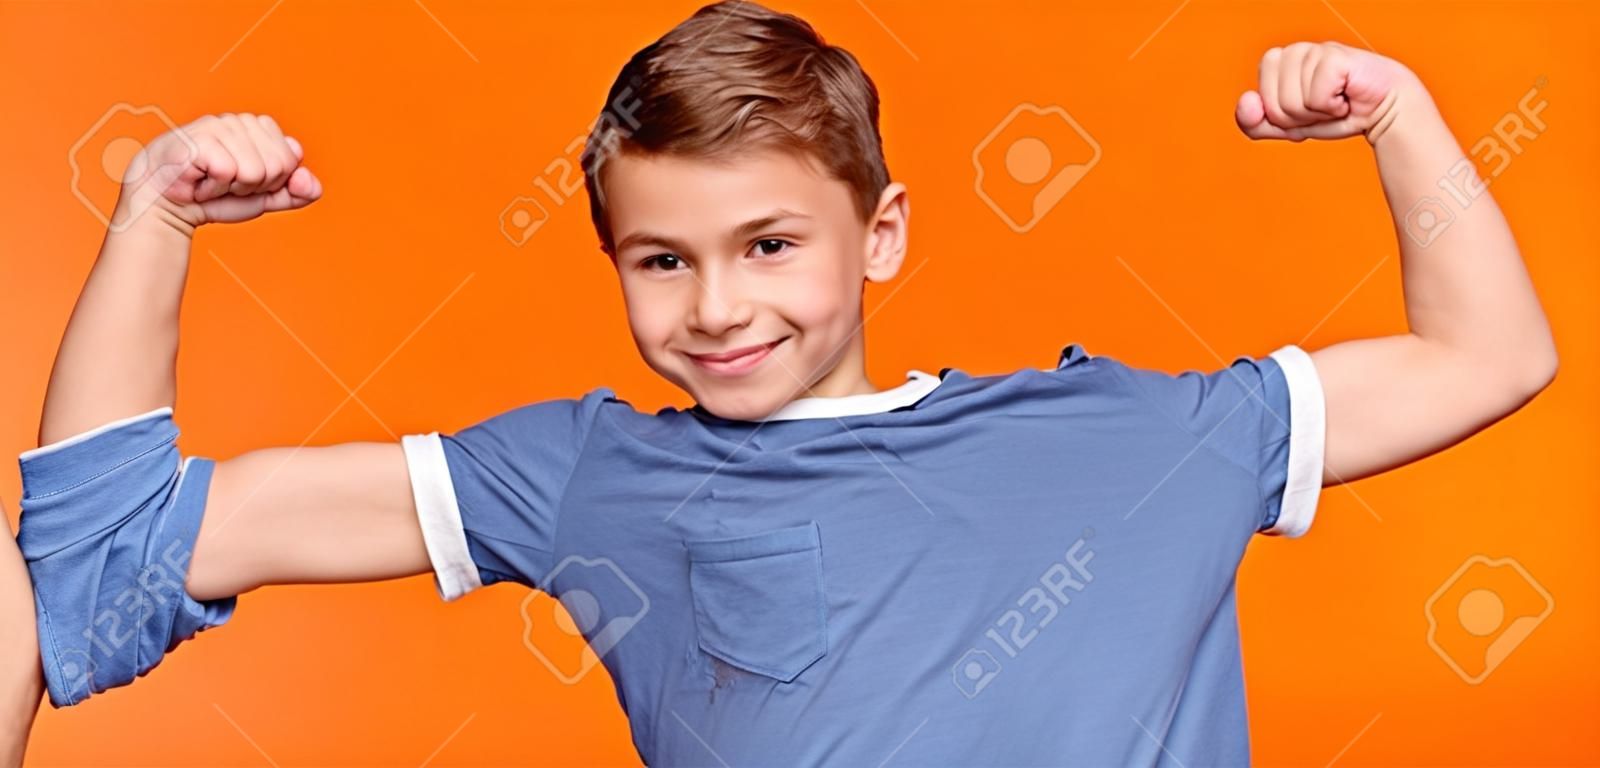 Strong little man. Smiling boy demonstrating his biceps and muscles, orange panorama background